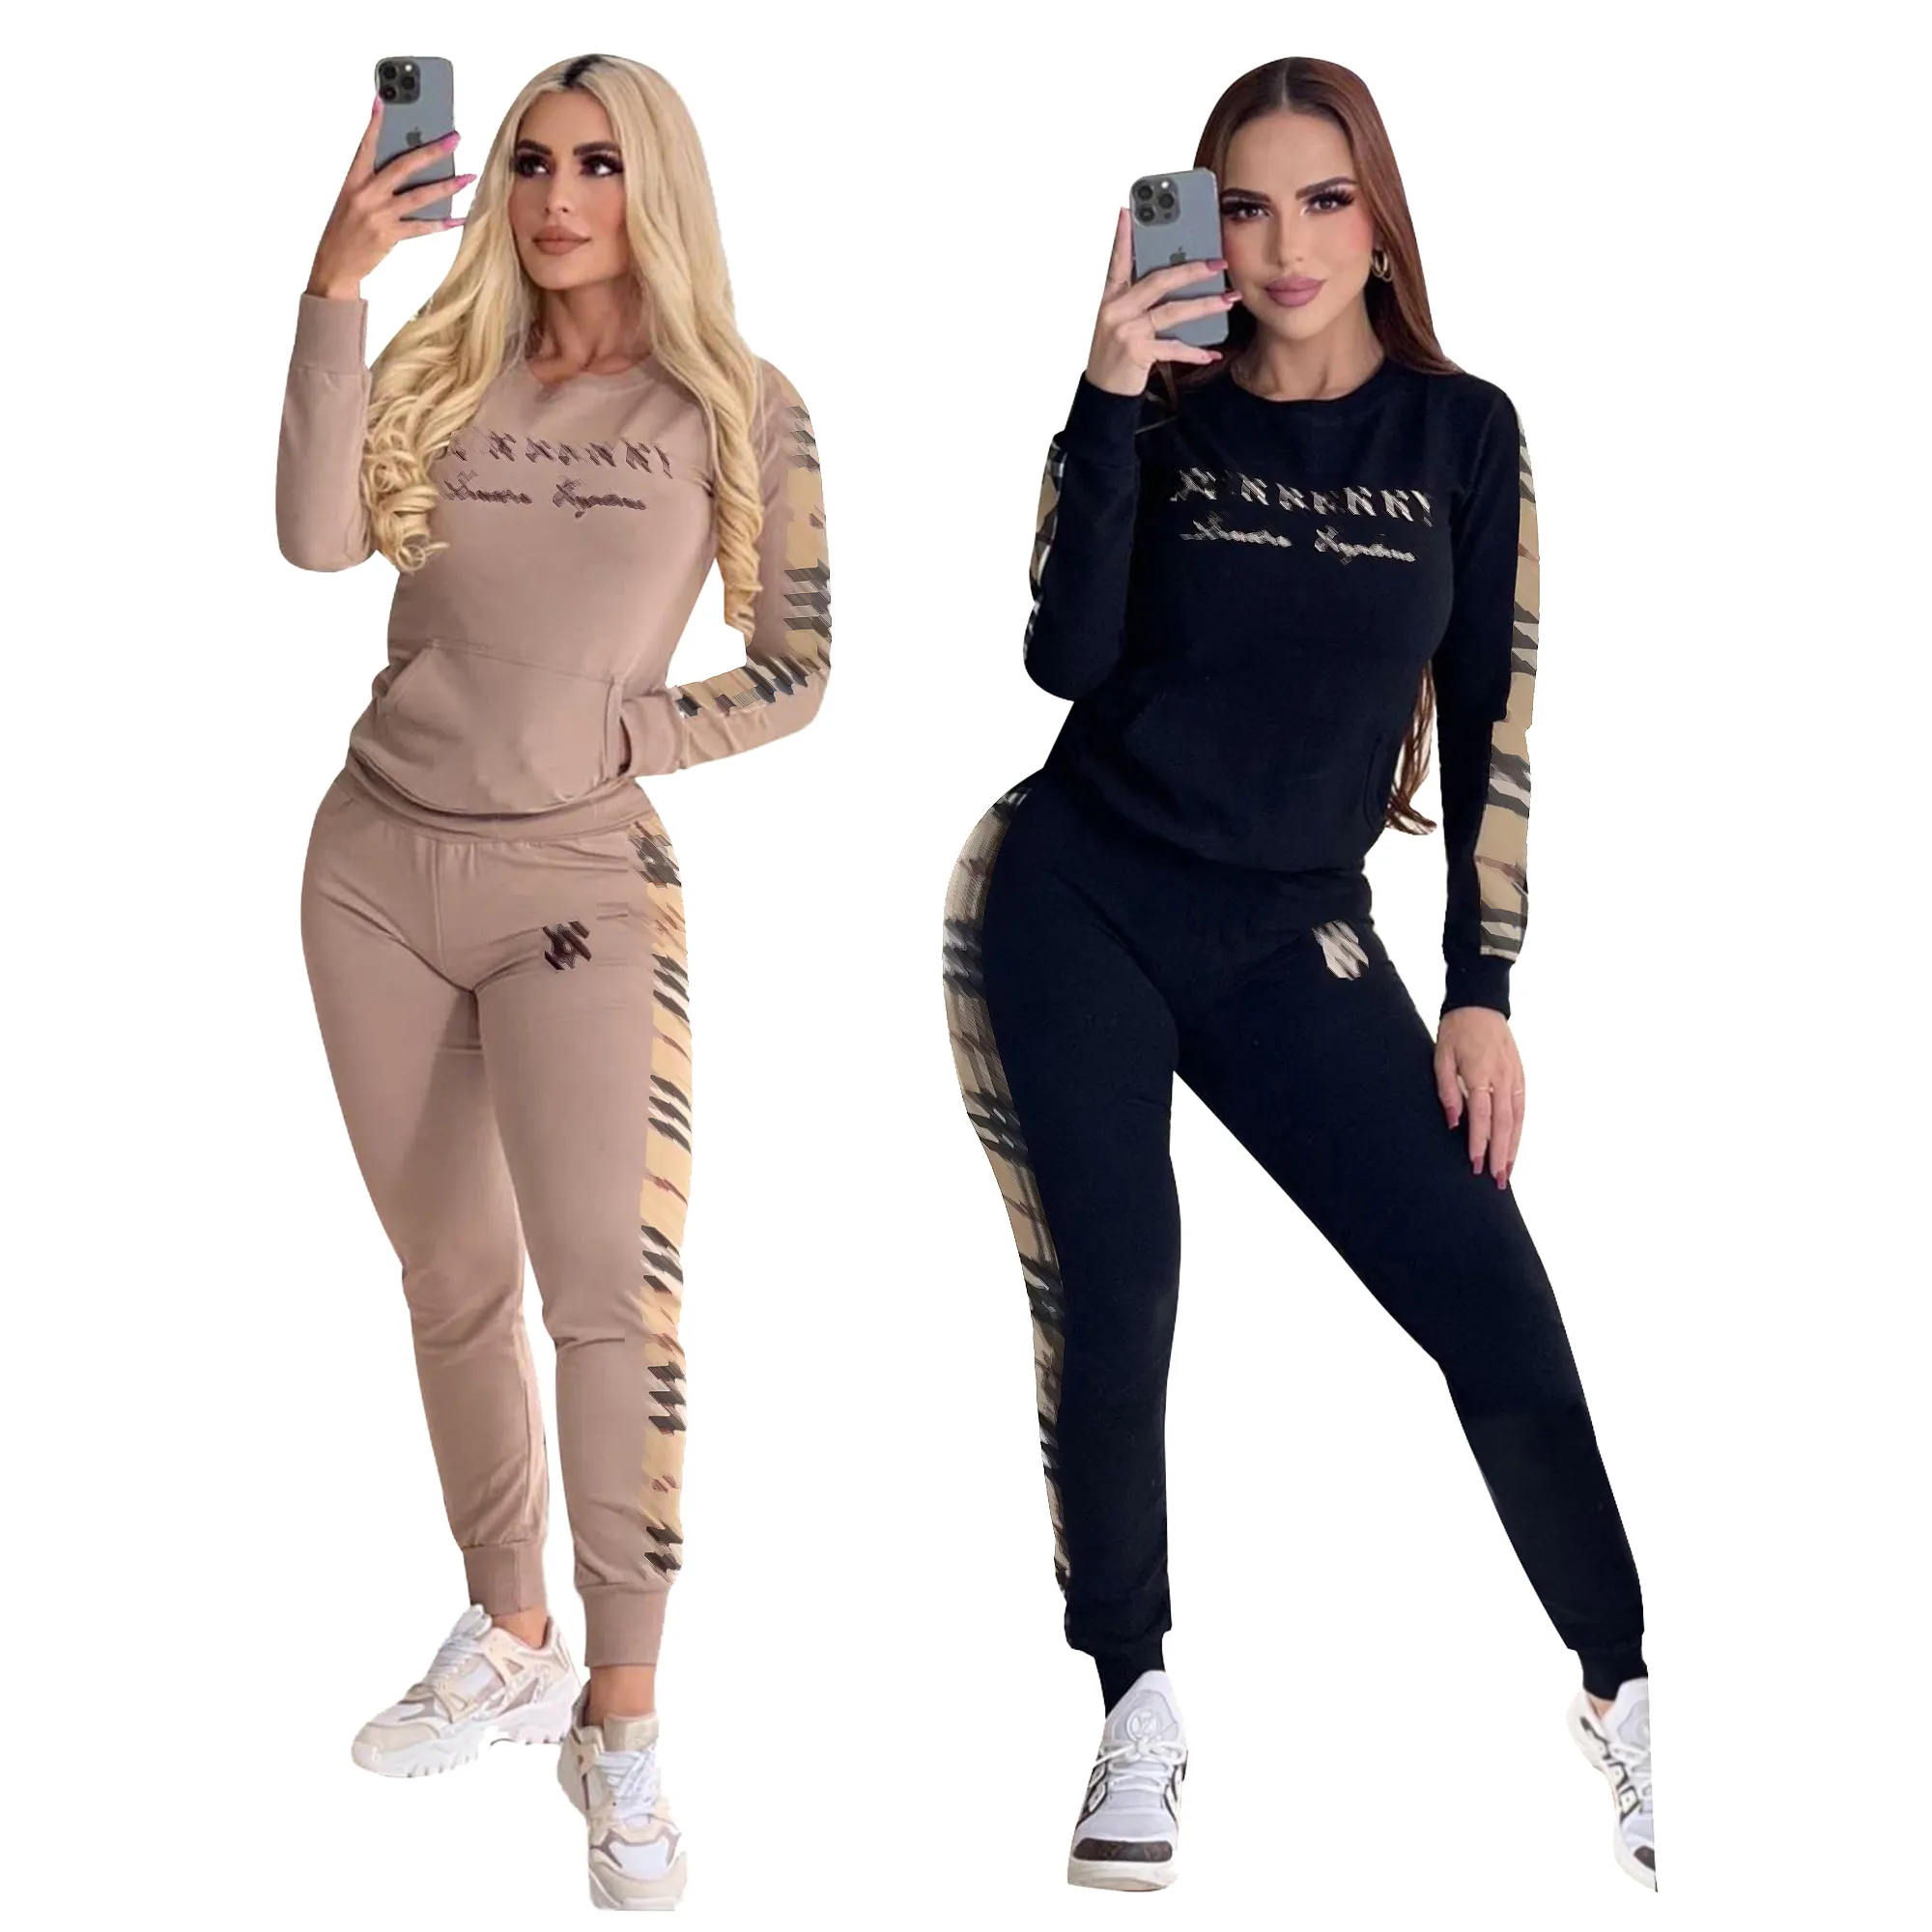 Designer Two Piece Black Pants Activewear Set Women Casual Pullover Top and Pants Set Free Ship